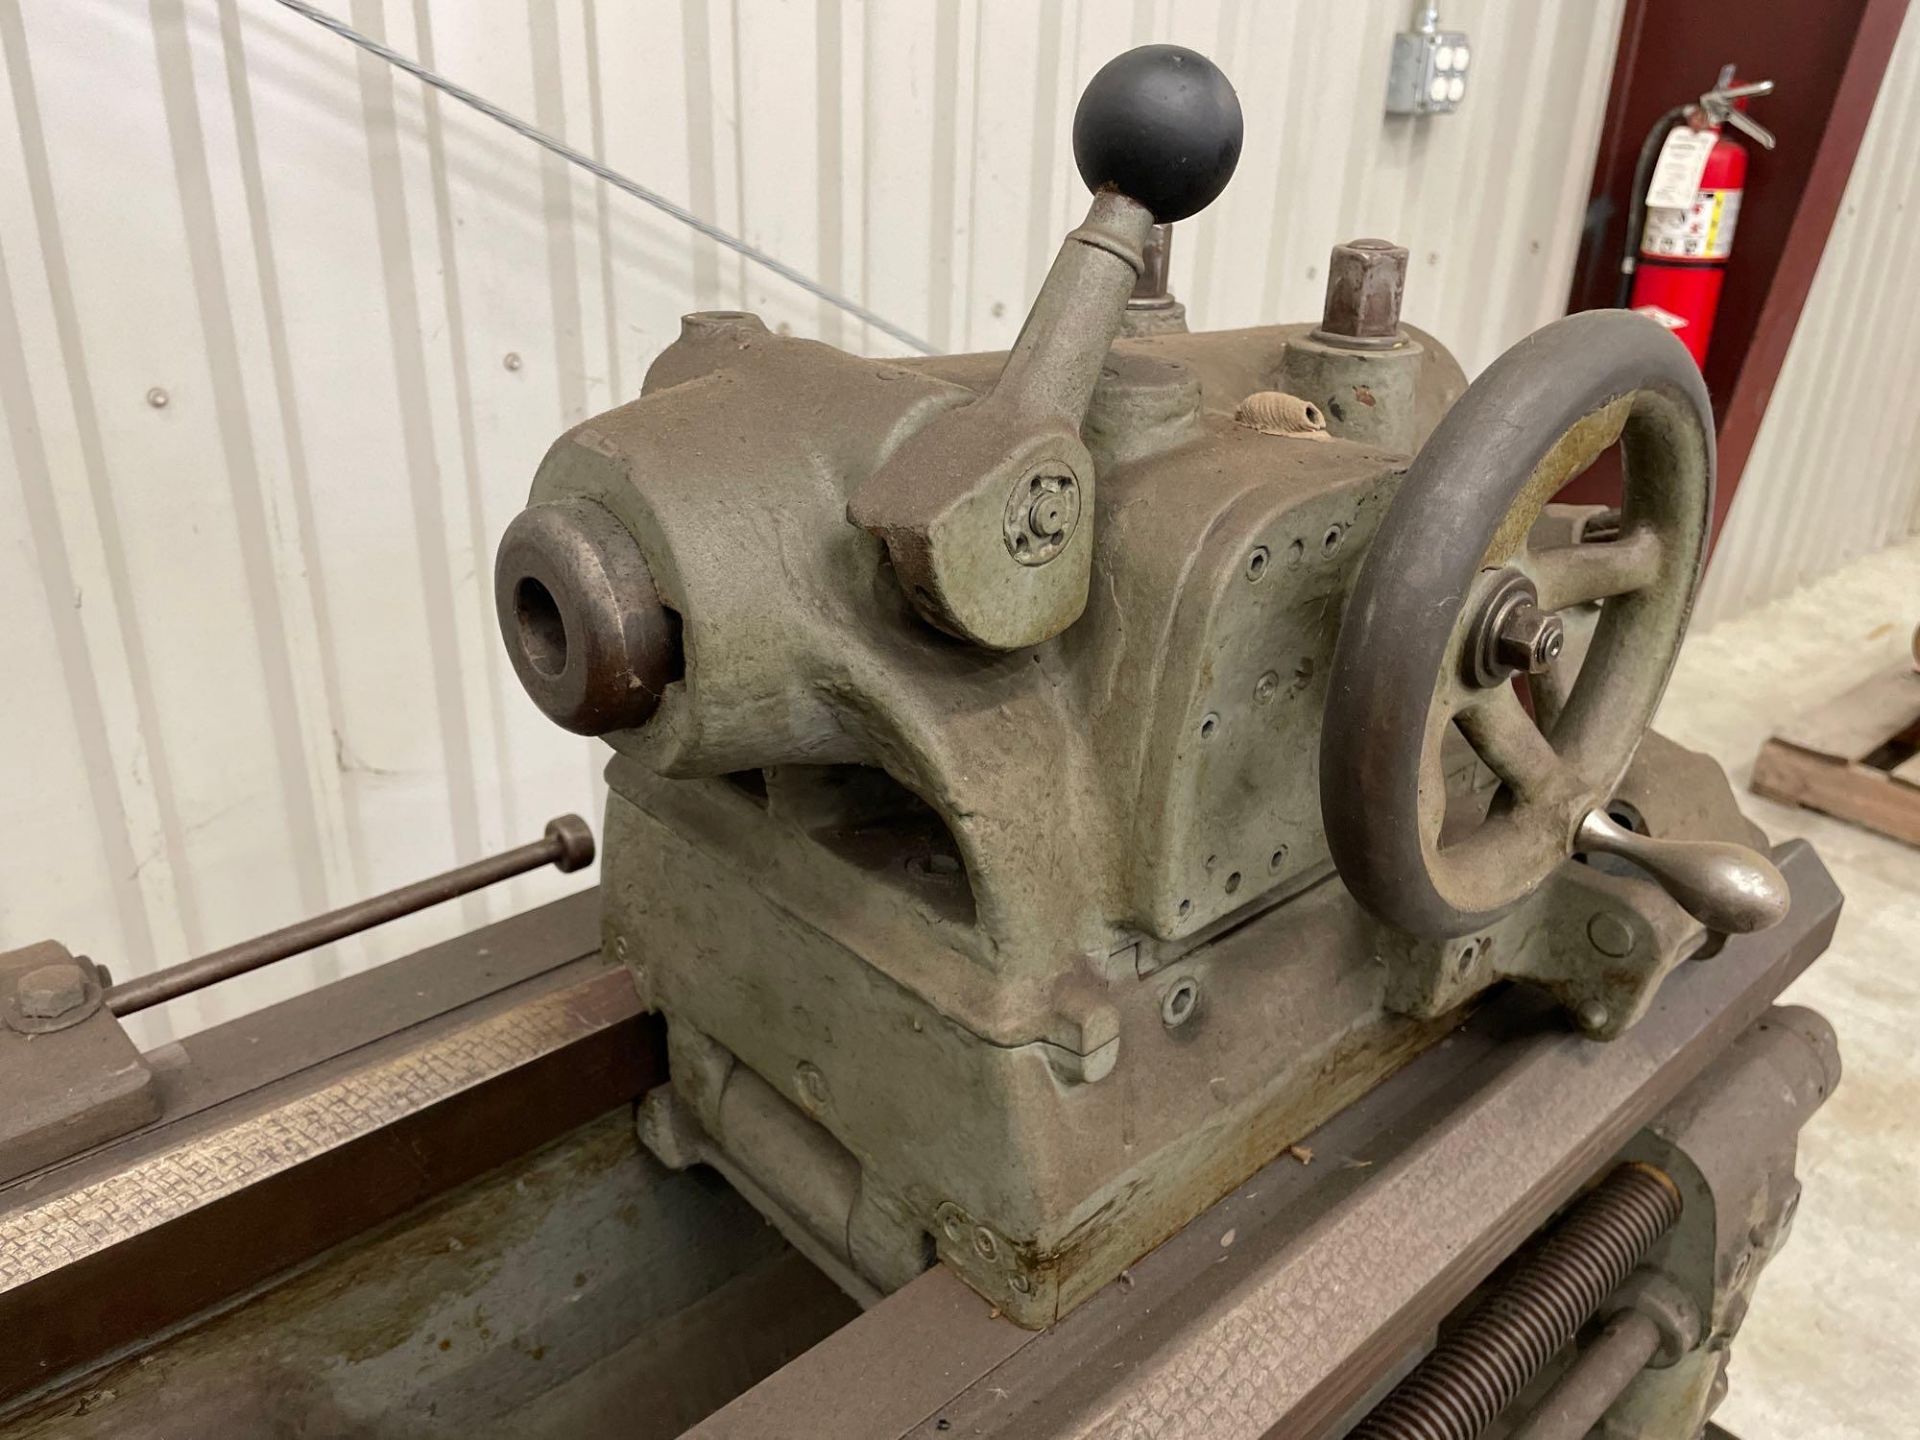 Axelson 16 Lathe, S/N 2789 - Image 6 of 7